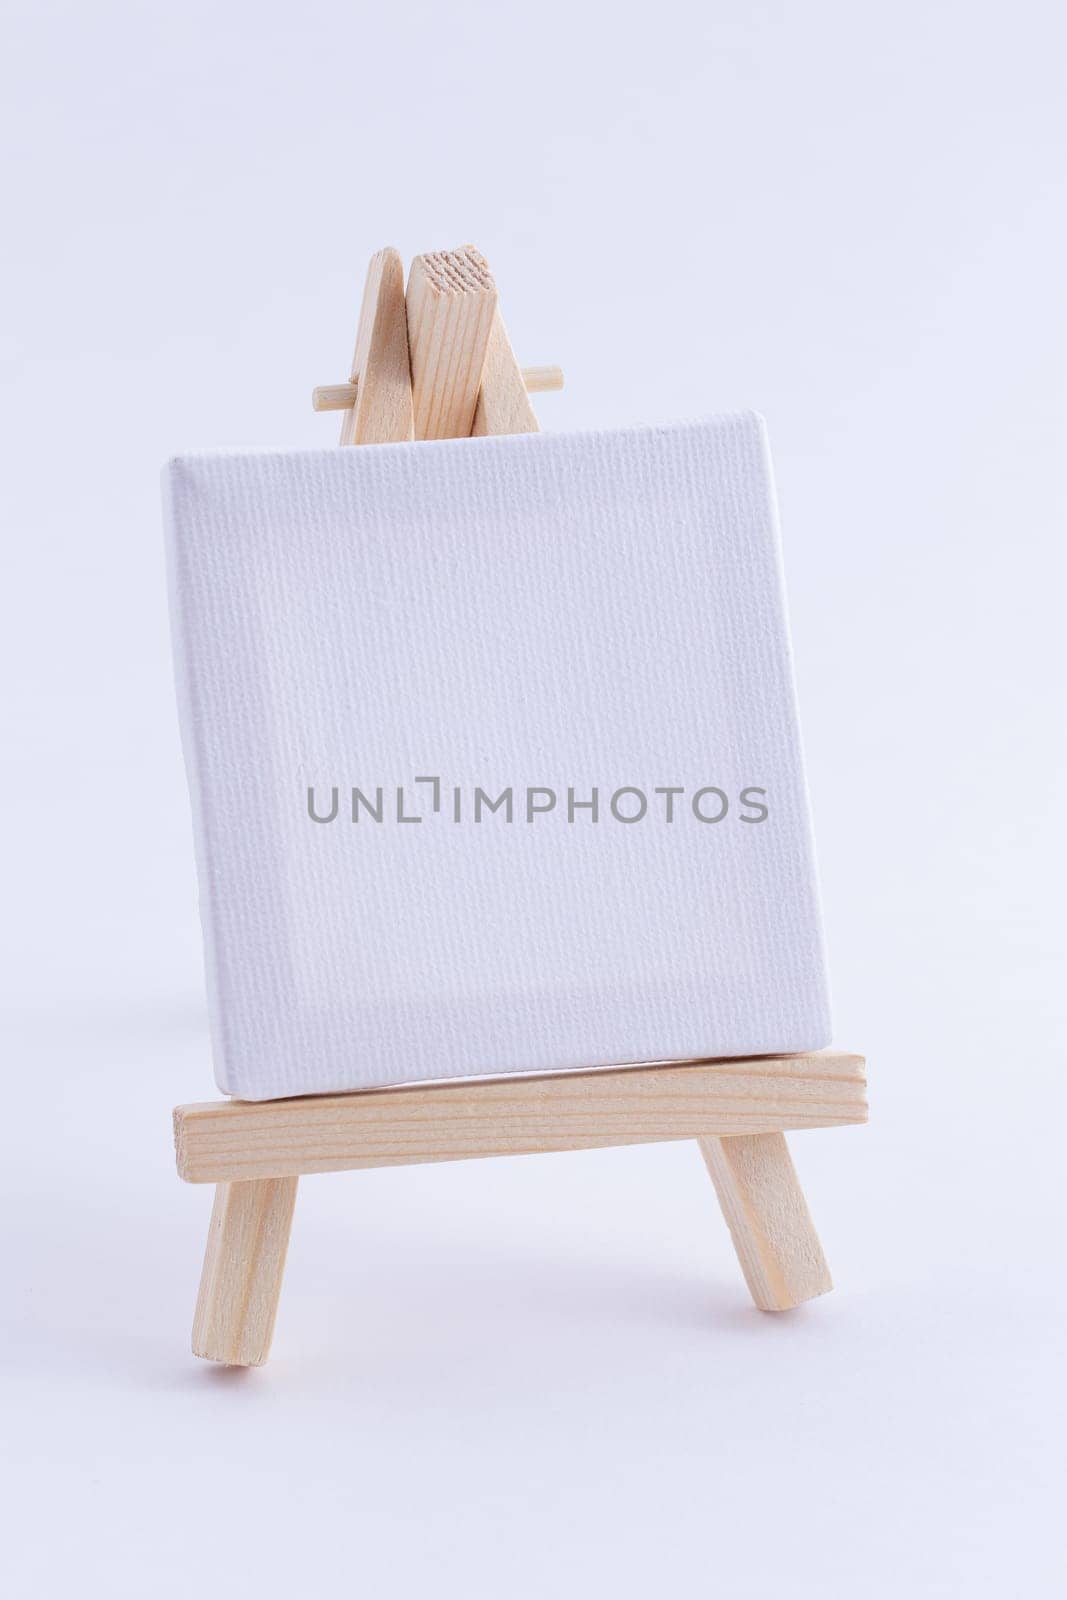 Wooden Easel Miniature with Blank White Square Canvas for Artists and Painters - Mockup. Mini Wooden Stand with Clean Artboard on White Background, Copy Space